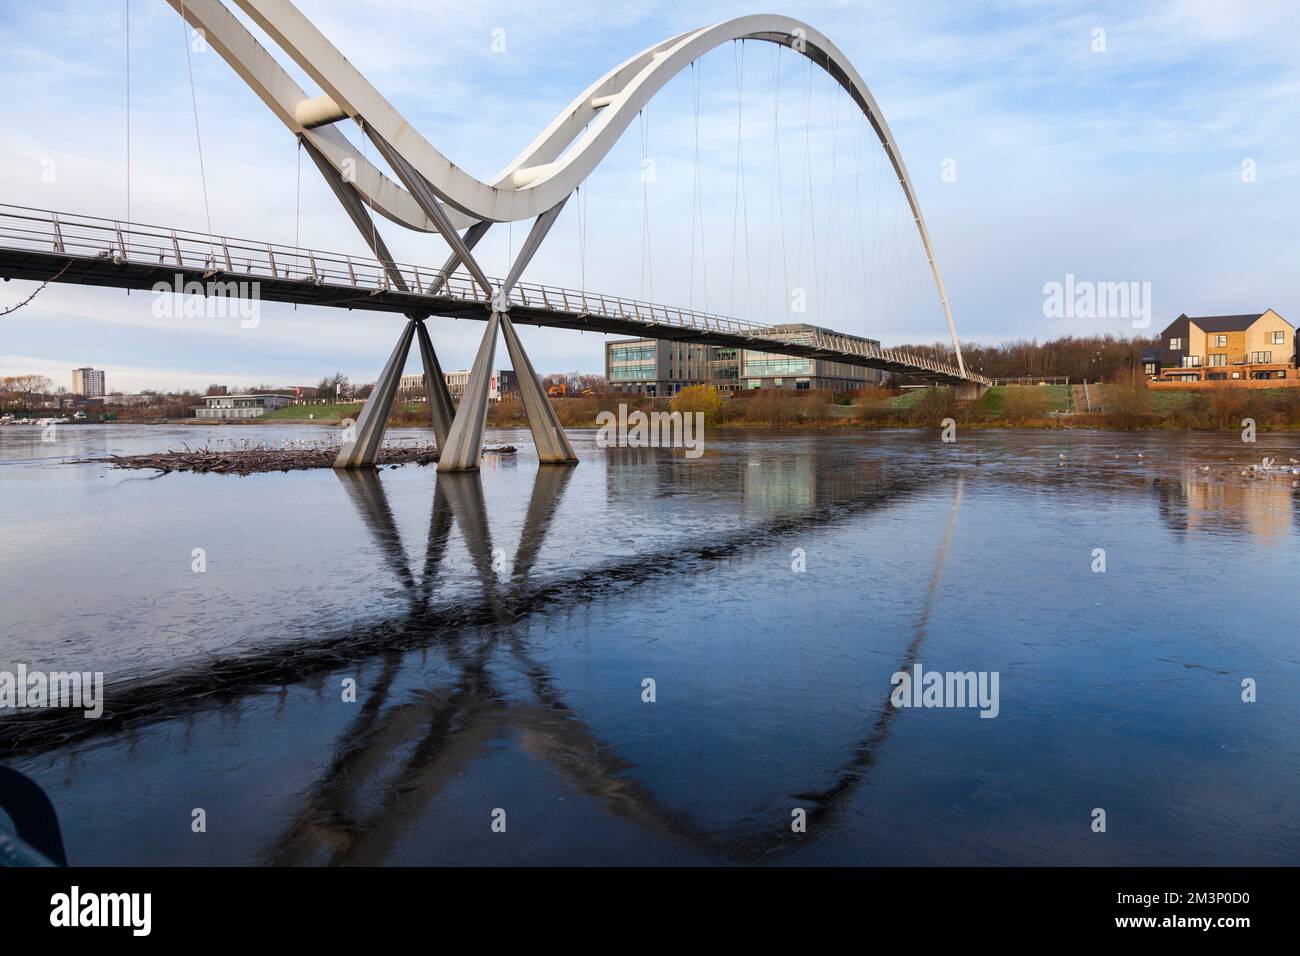 UK Weather.Stockton on Tees,UK 16th December 2022. The frozen waters of the River Tees at the Infinity Bridge. Children were still playing on a frozen pond in nearby Darlington despite warnings after the Solihull tragedy.  David Dixon / Alamy Stock Photo